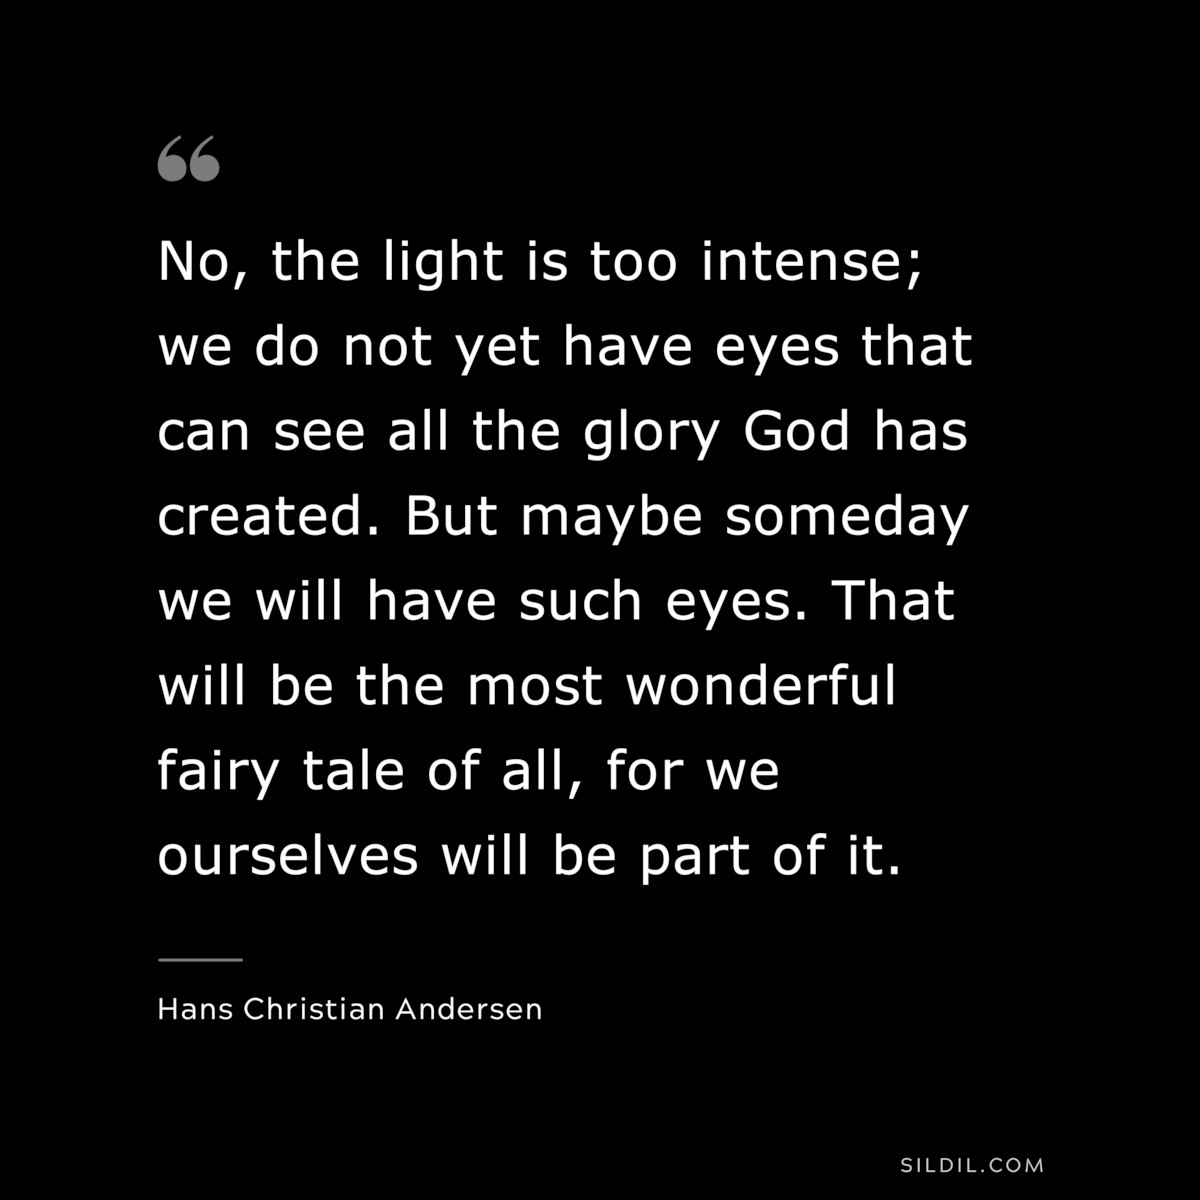 No, the light is too intense; we do not yet have eyes that can see all the glory God has created. But maybe someday we will have such eyes. That will be the most wonderful fairy tale of all, for we ourselves will be part of it. ― Hans Christian Andersen